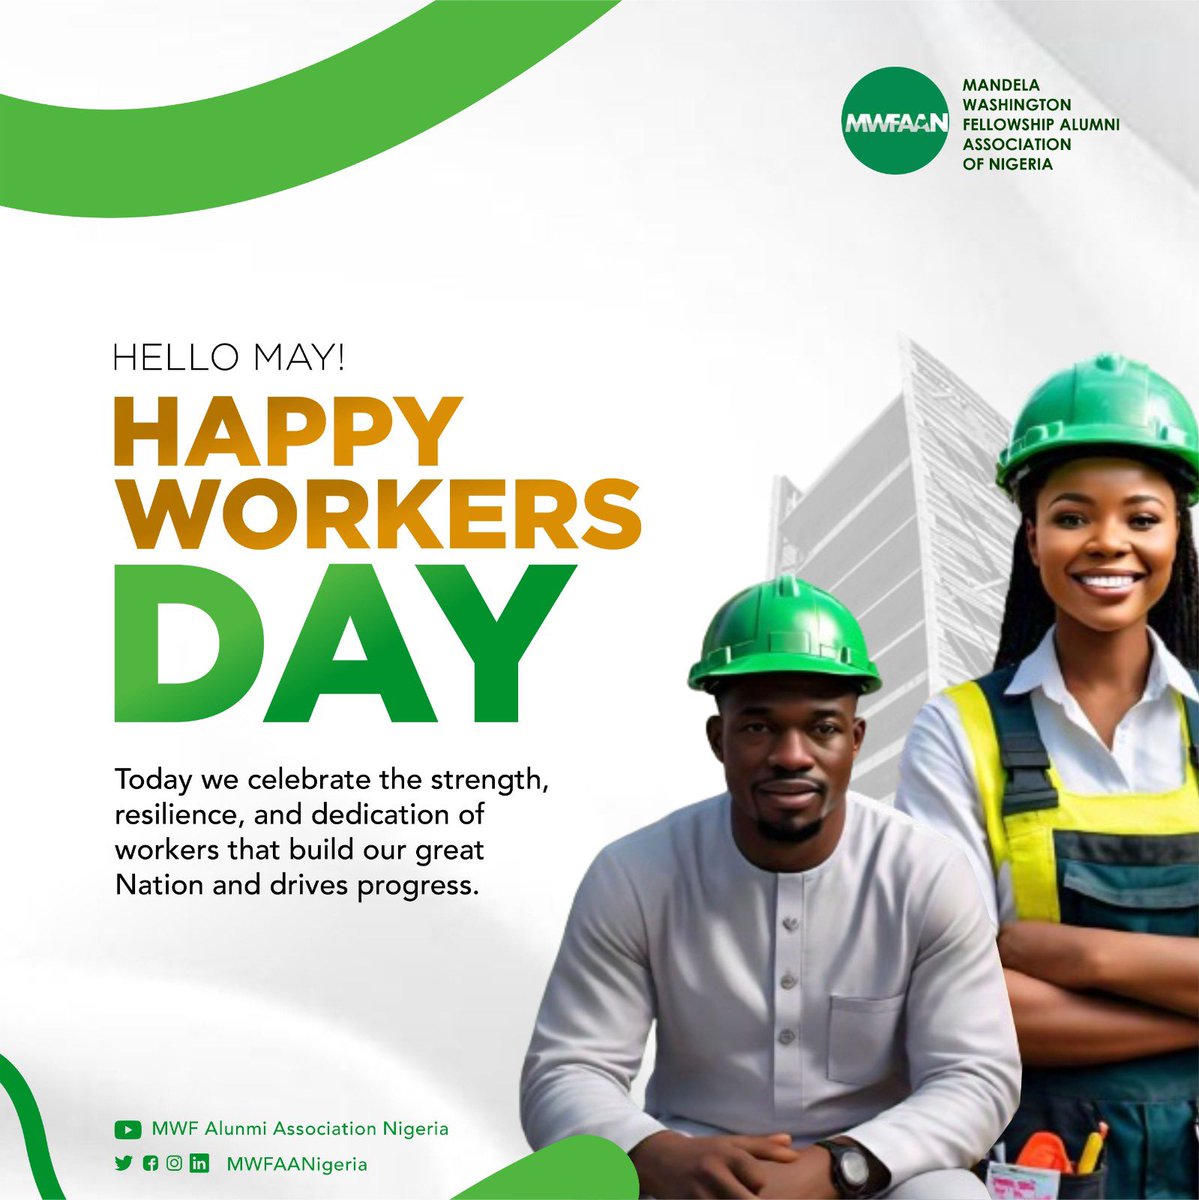 Happy Workers Day